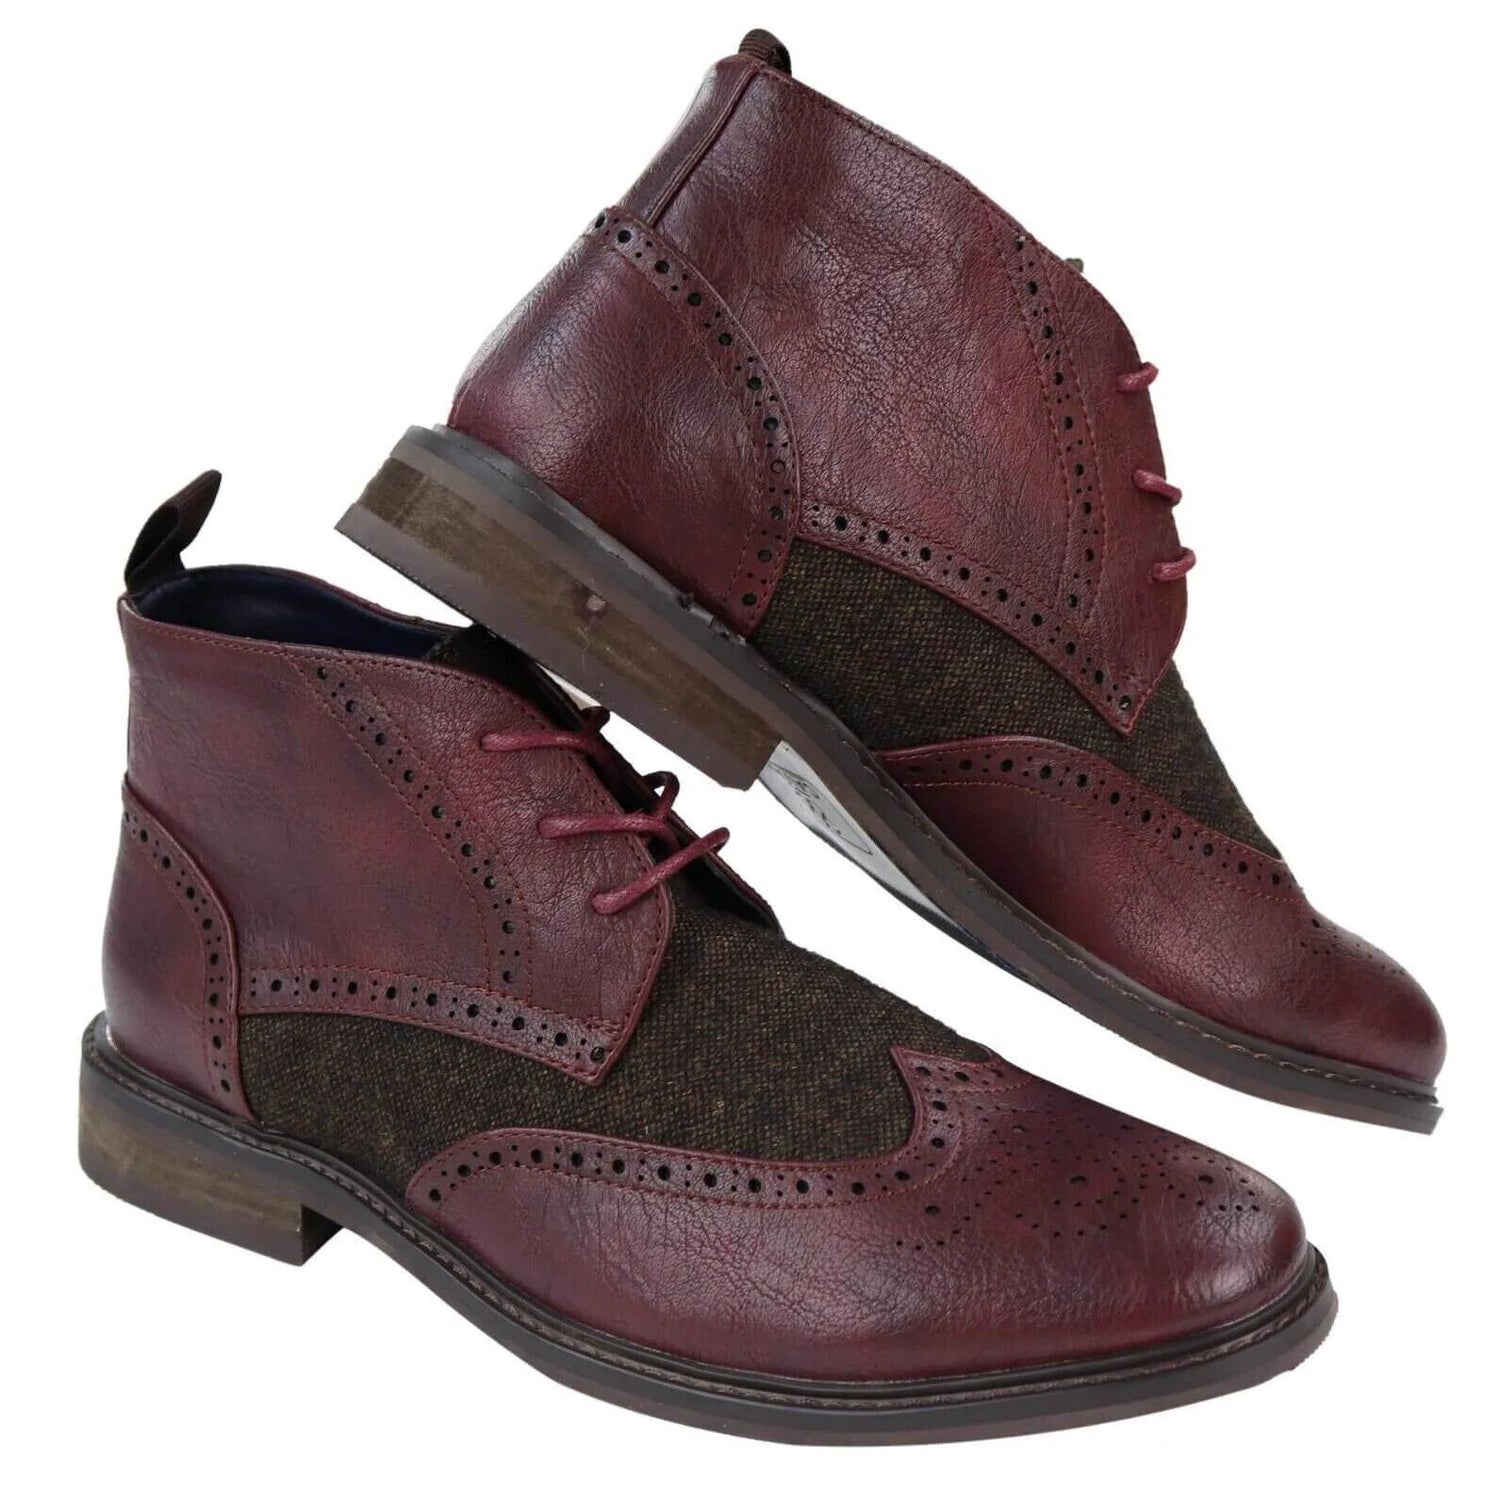 Mens Classic Tweed Oxford Brogue Ankle Boots in Wine Leather - Upperclass Fashions 